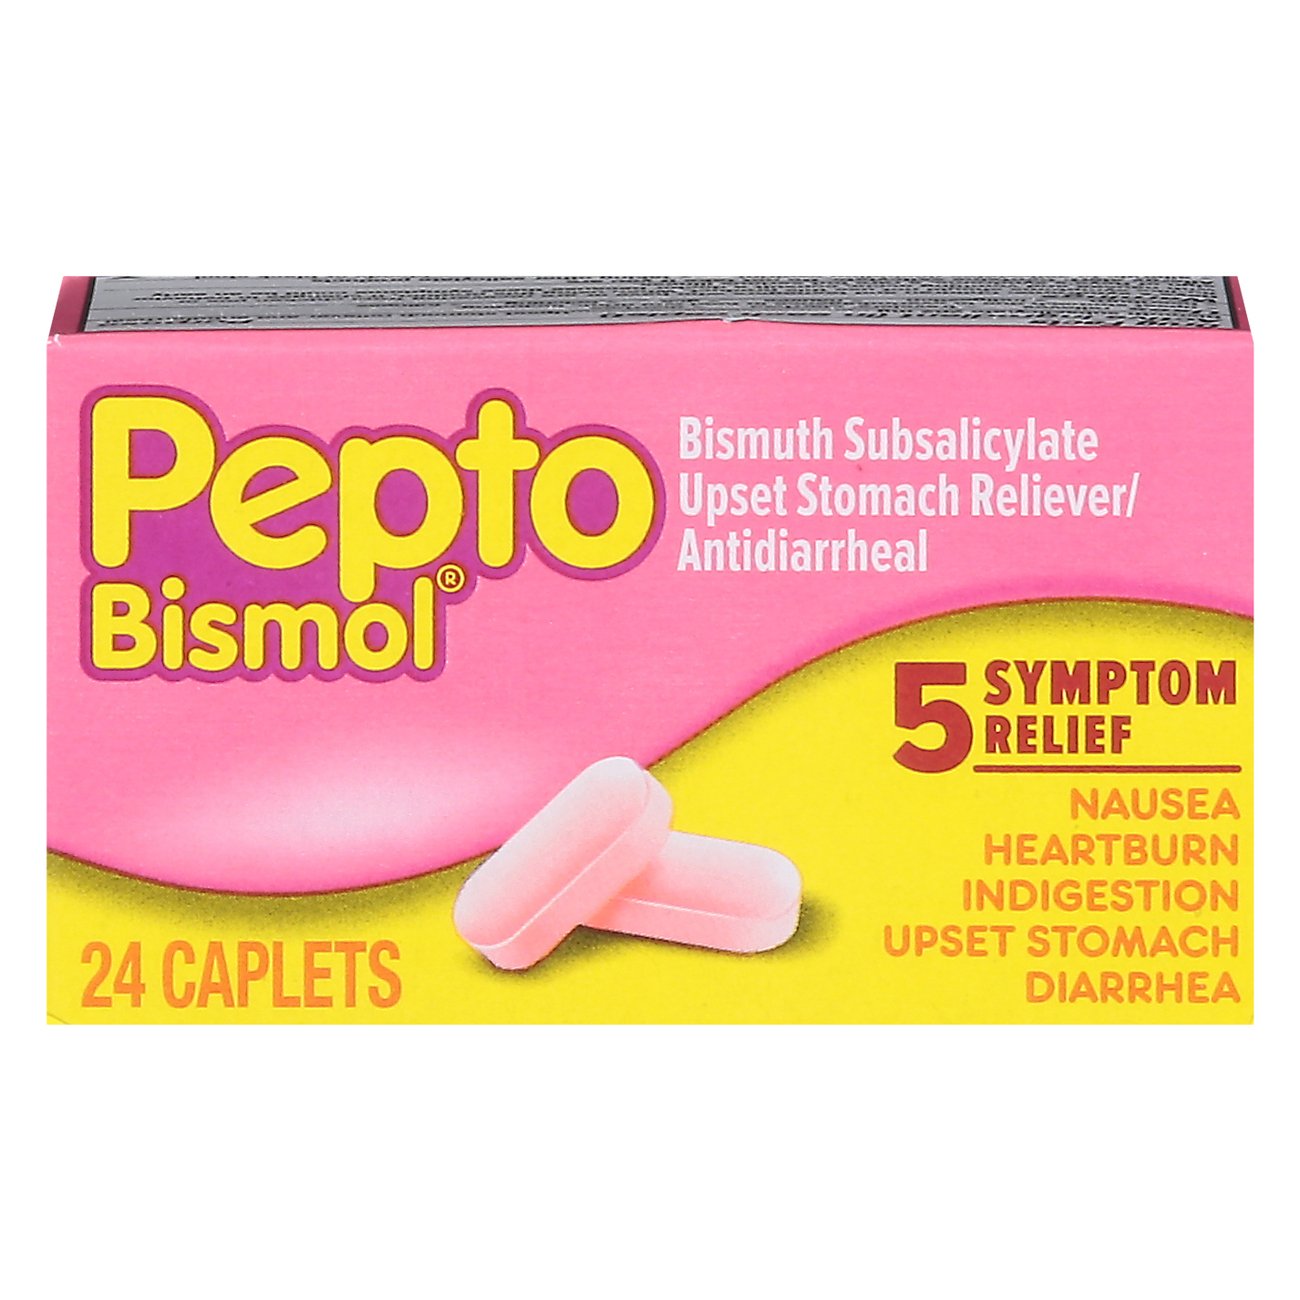 how much chewable pepto bismol for dogs